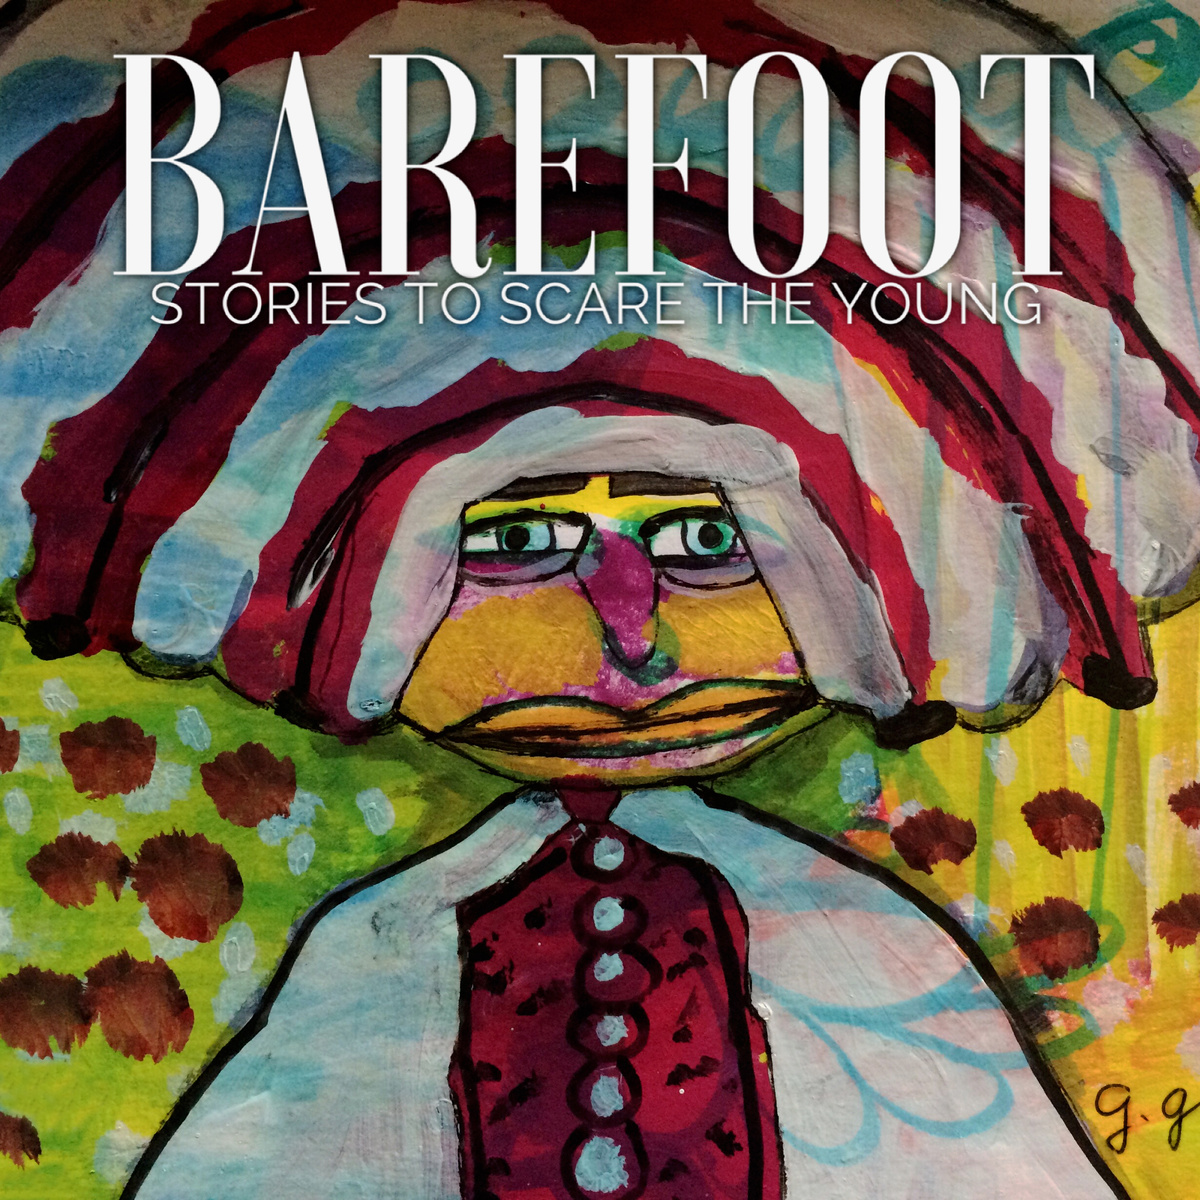 barefoot stories to scare the young album cover.jpg